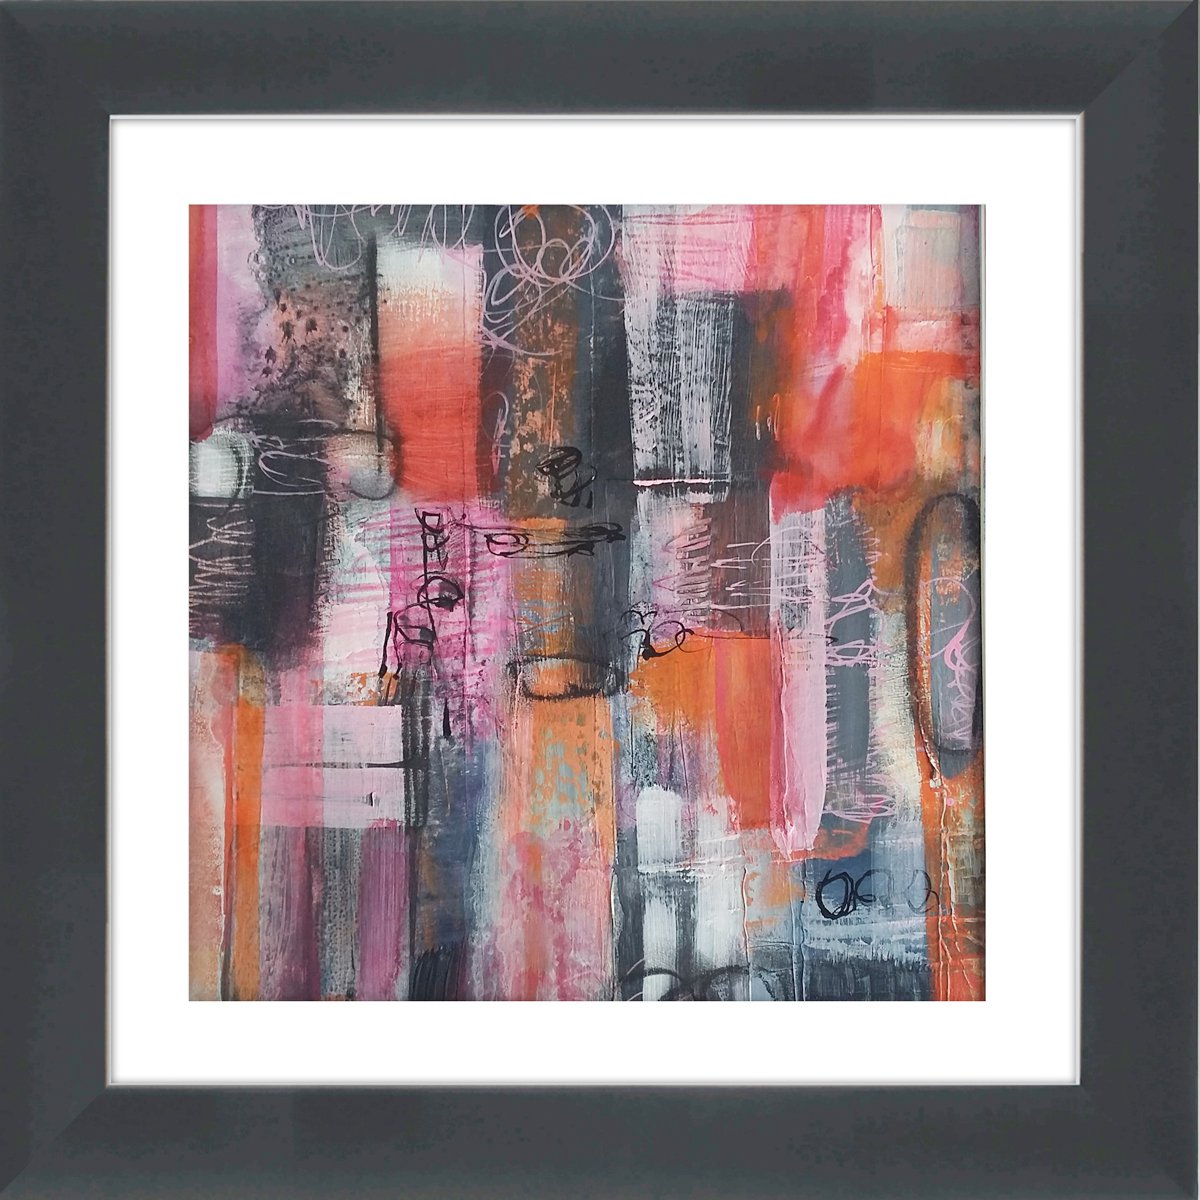 Abstraction #17 by Carolynne Coulson